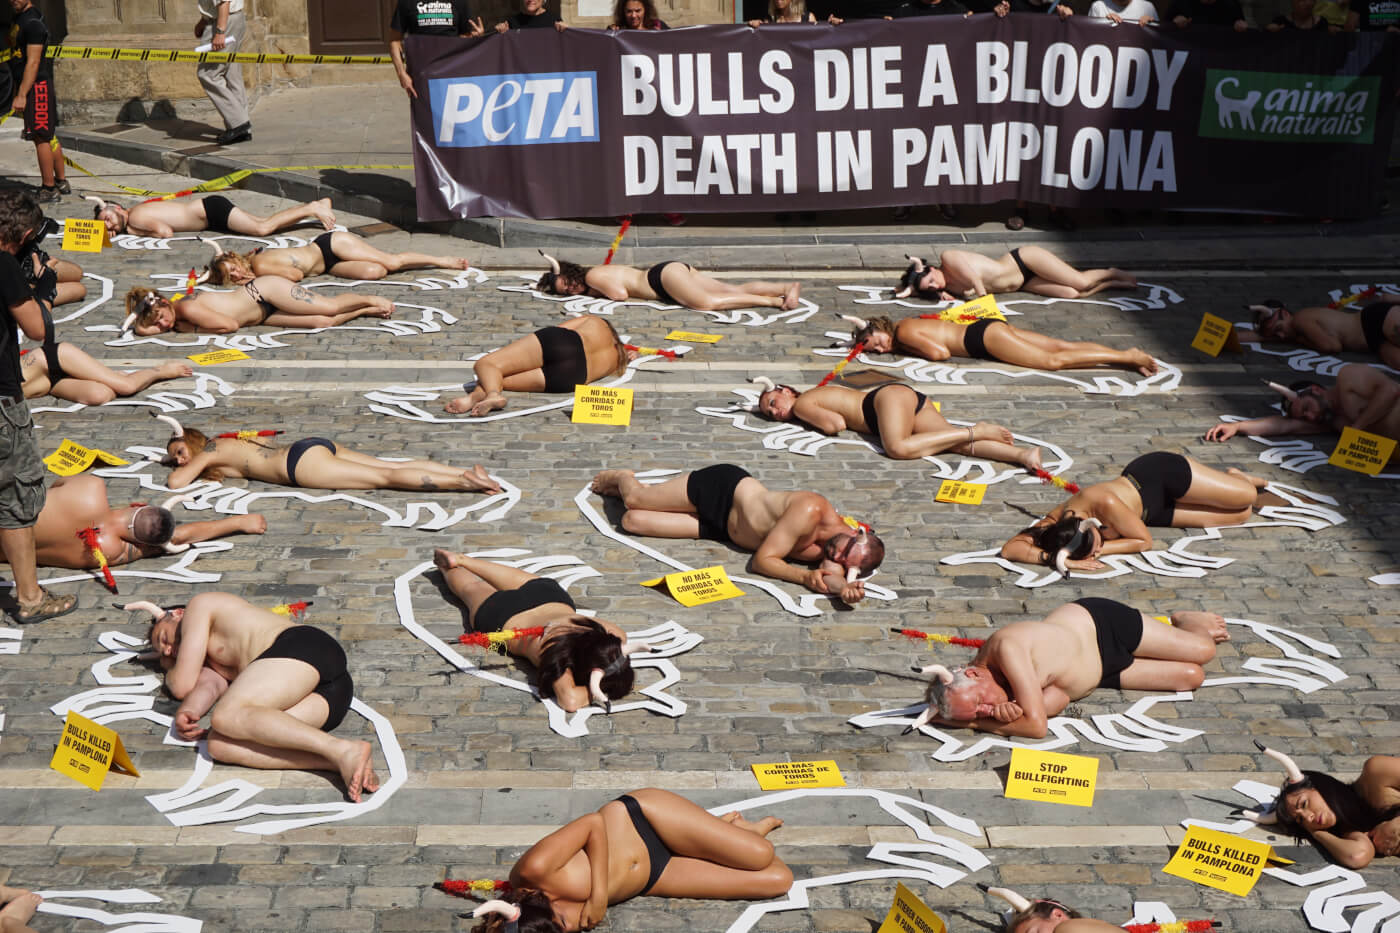 54 protestors staged a “crime scene” cordoned off with yellow tape in Pamplona, Spain, to call to end the annual torture and killing of the bulls.